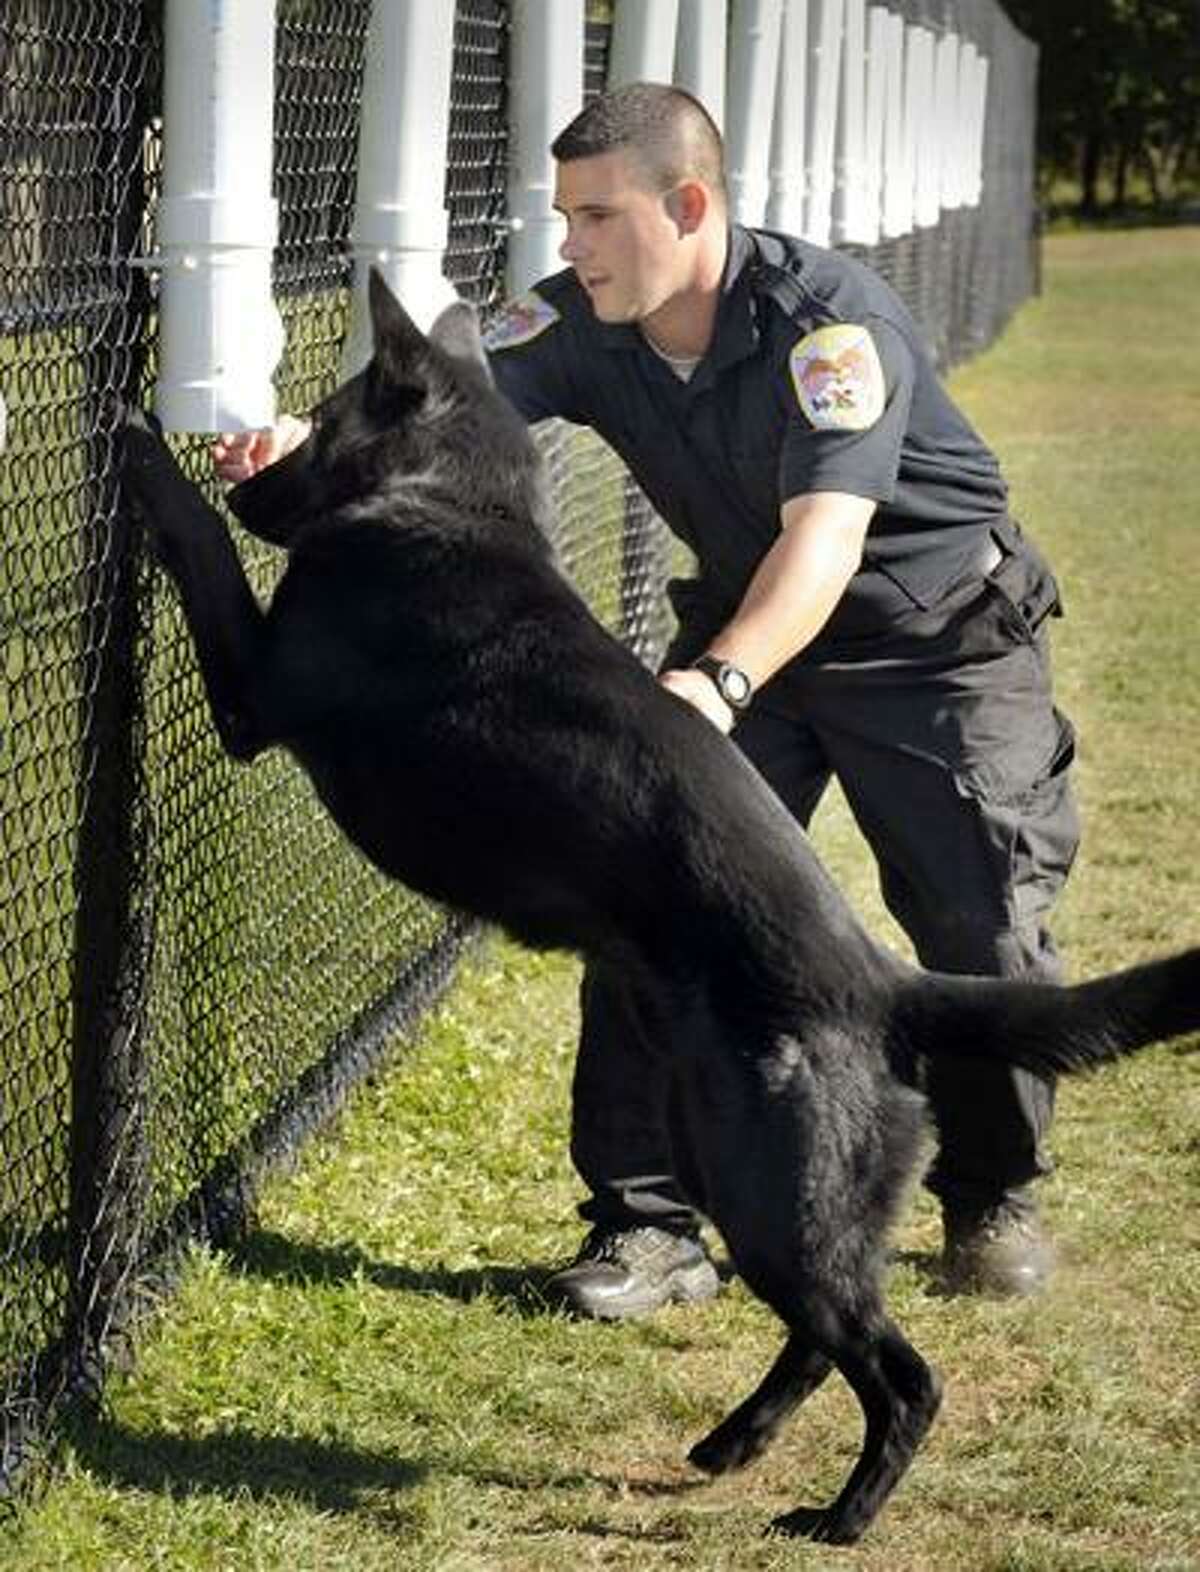 Danbury Police Officer Greg Topa teaches Zeke how to sniff out narcotics on Sept. 20. (AP)